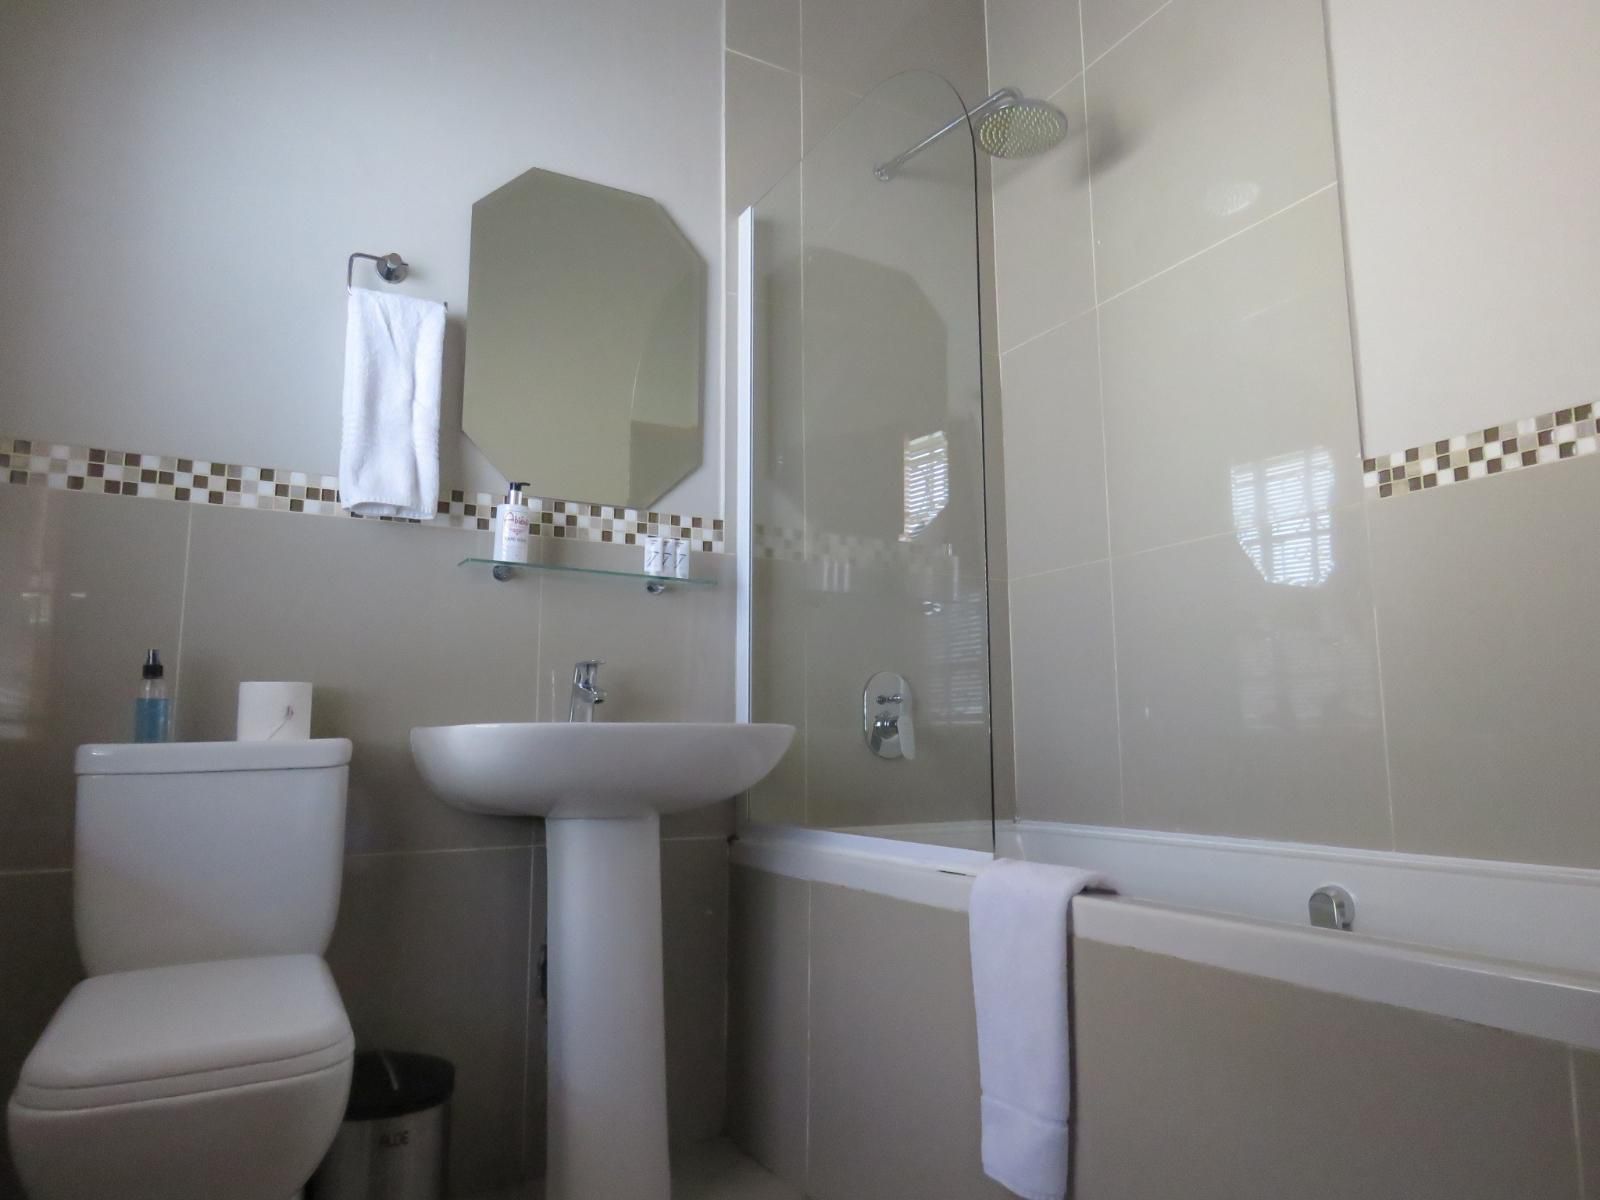 Abiento Guesthouse Park West Bloemfontein Free State South Africa Unsaturated, Bathroom